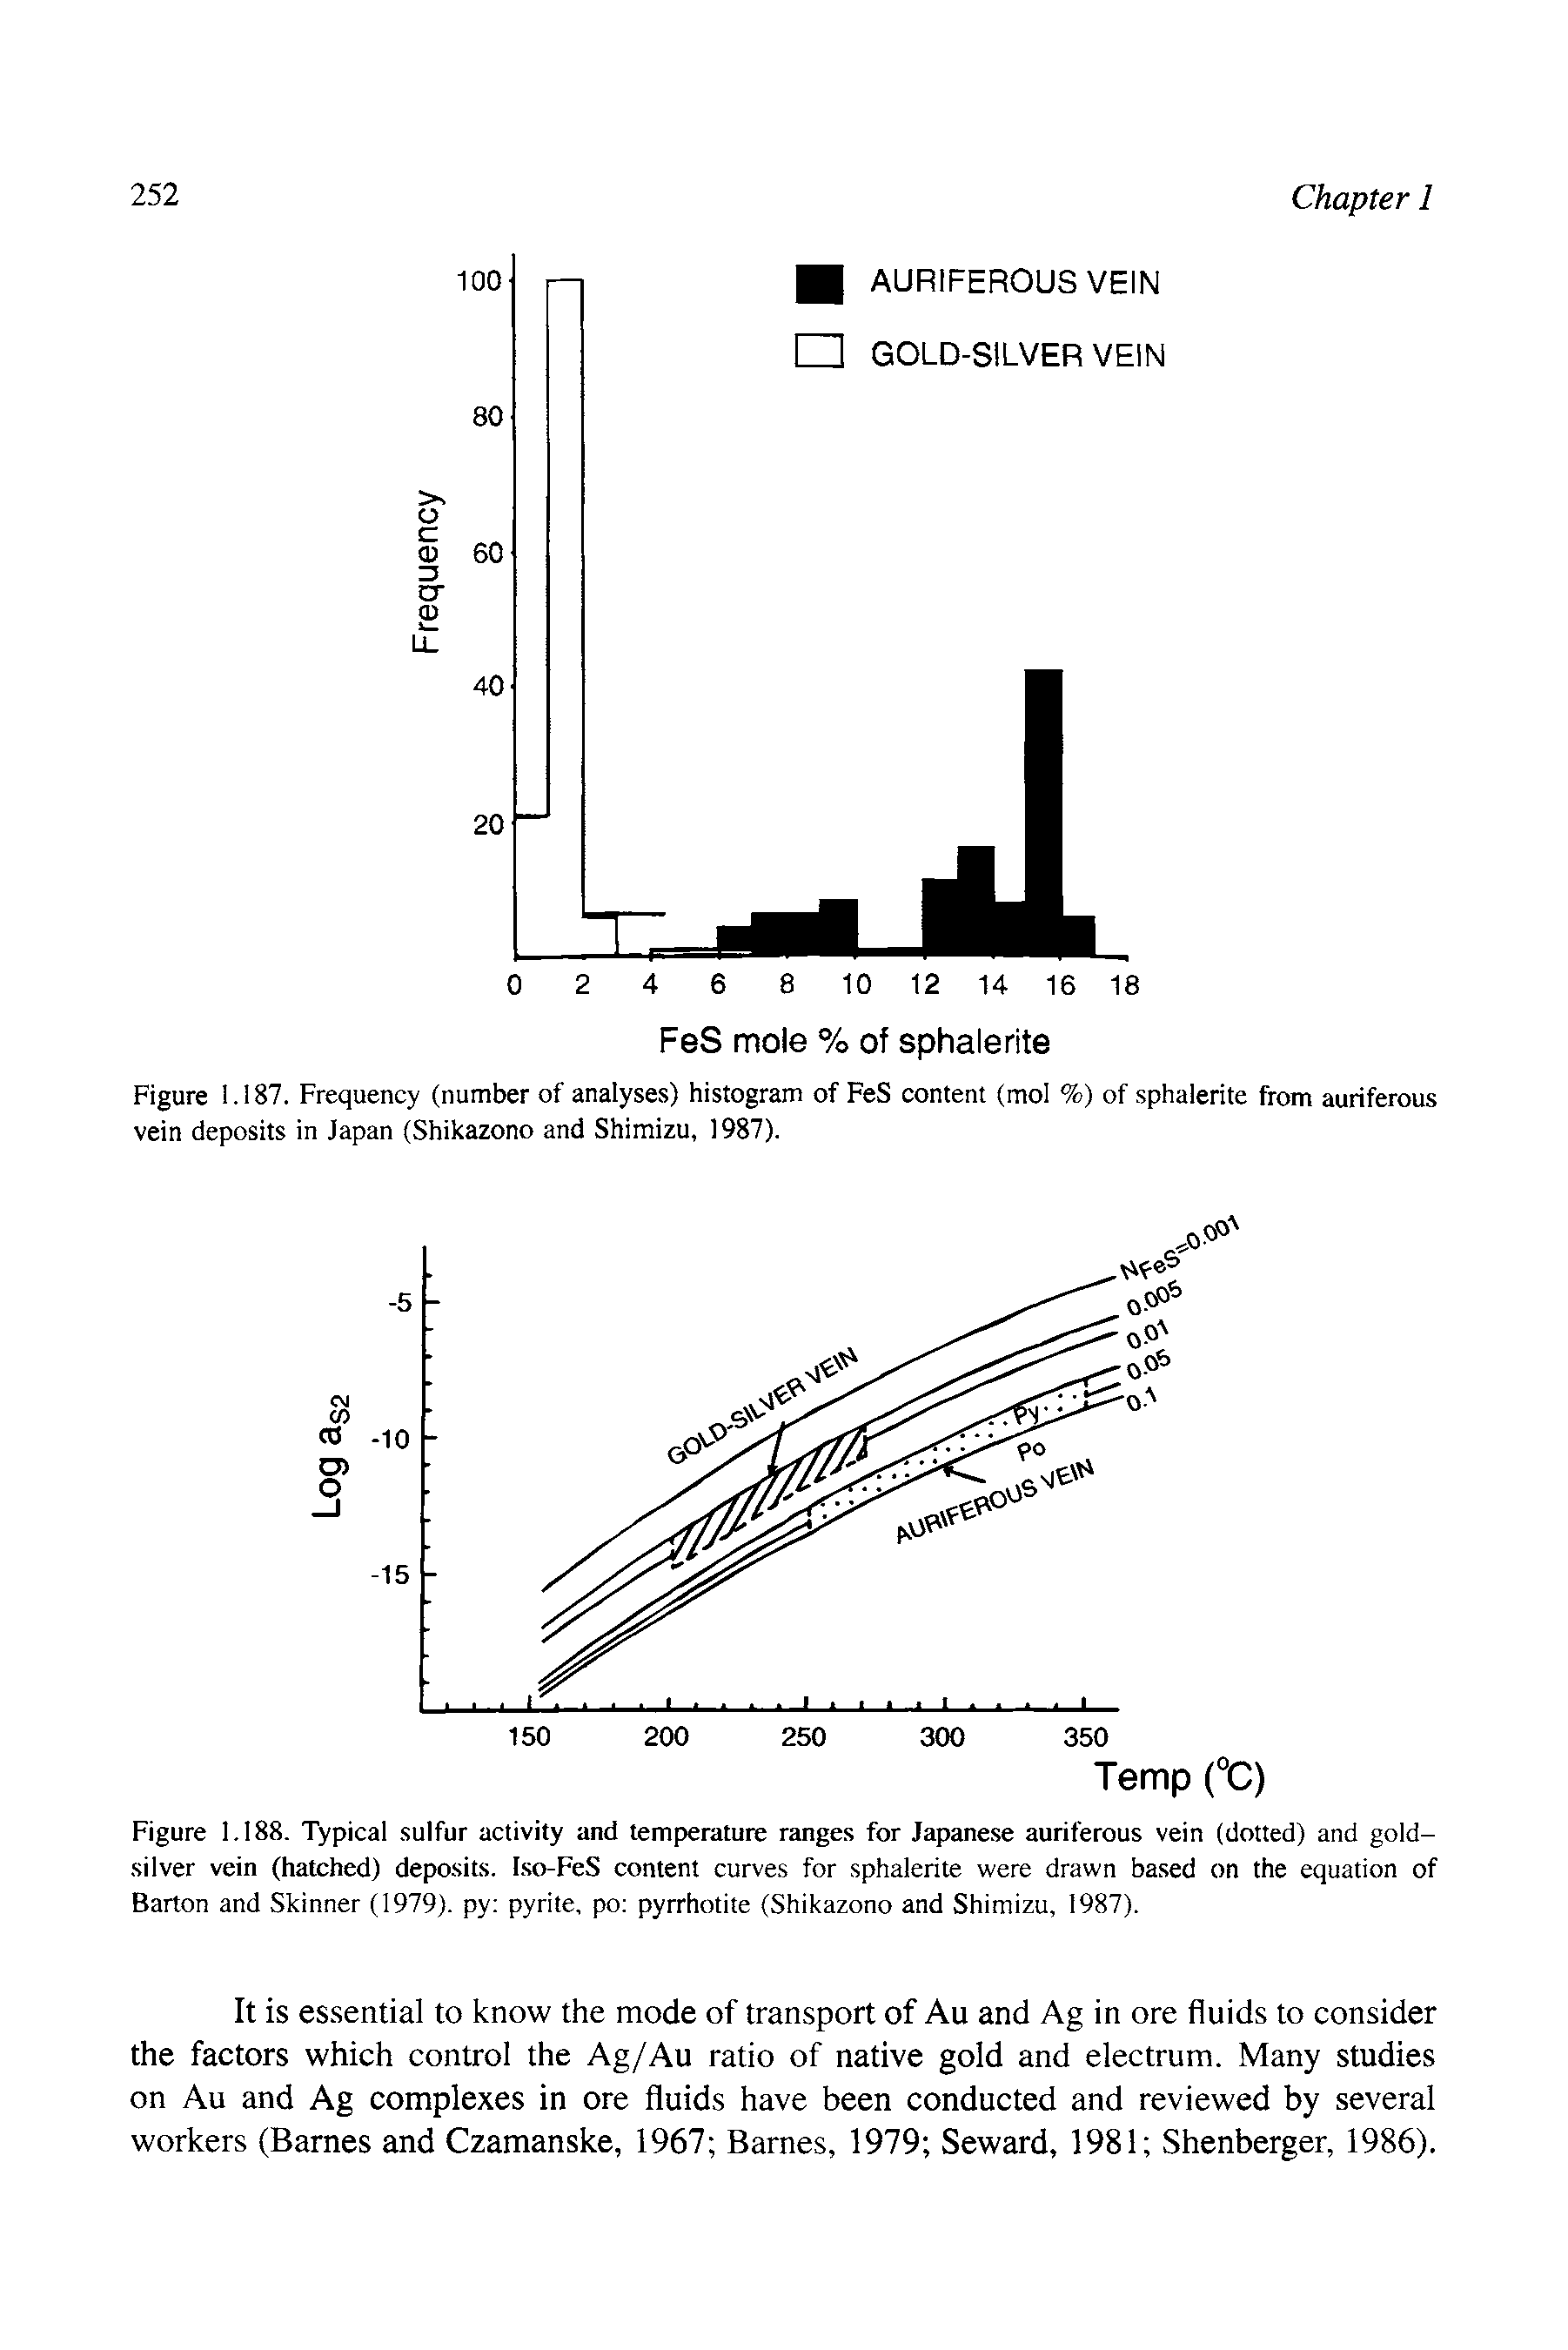 Figure 1.187. Frequency (number of analyses) histogram of FeS content (mol %) of sphalerite from auriferous vein deposits in Japan (Shikazono and Shimizu, 1987).